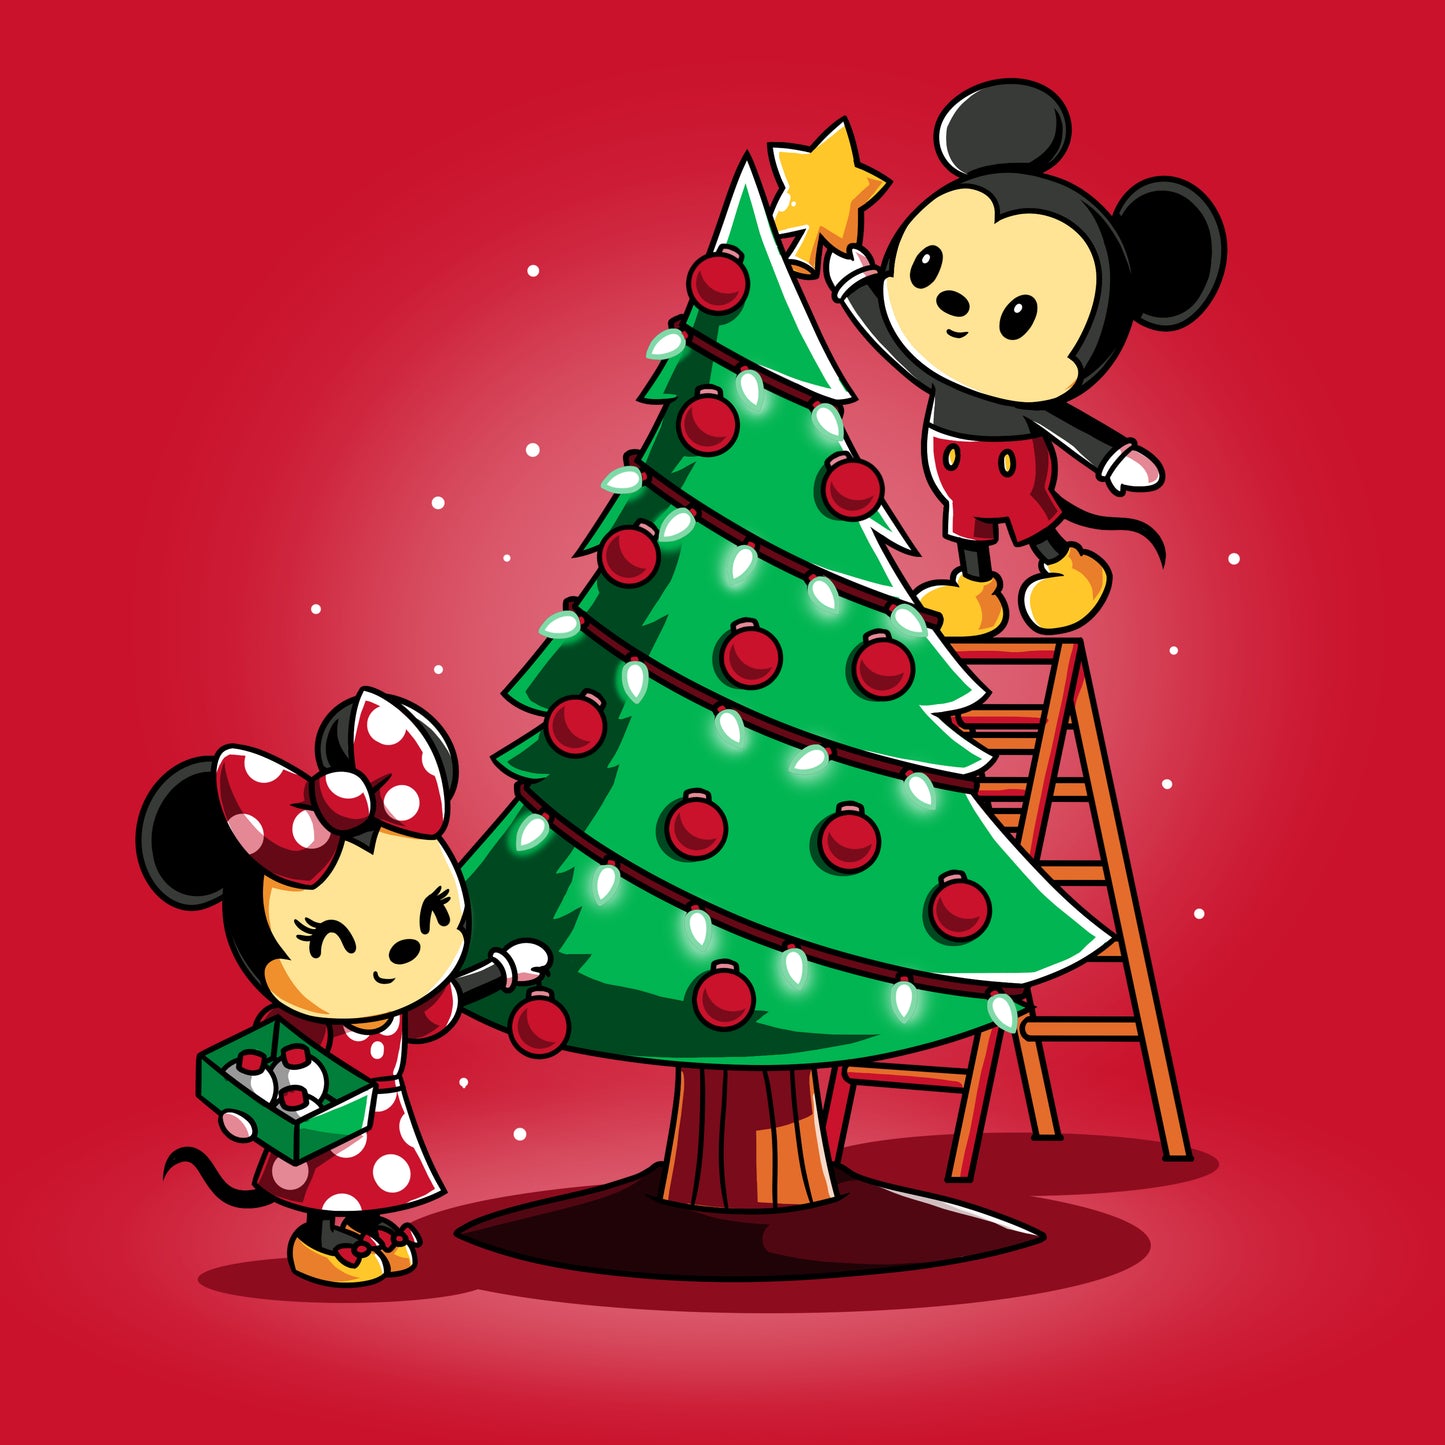 Officially licensed Disney Mickey and Minnie's Christmas Tree T-shirt featuring the iconic duo decorating a Christmas tree.